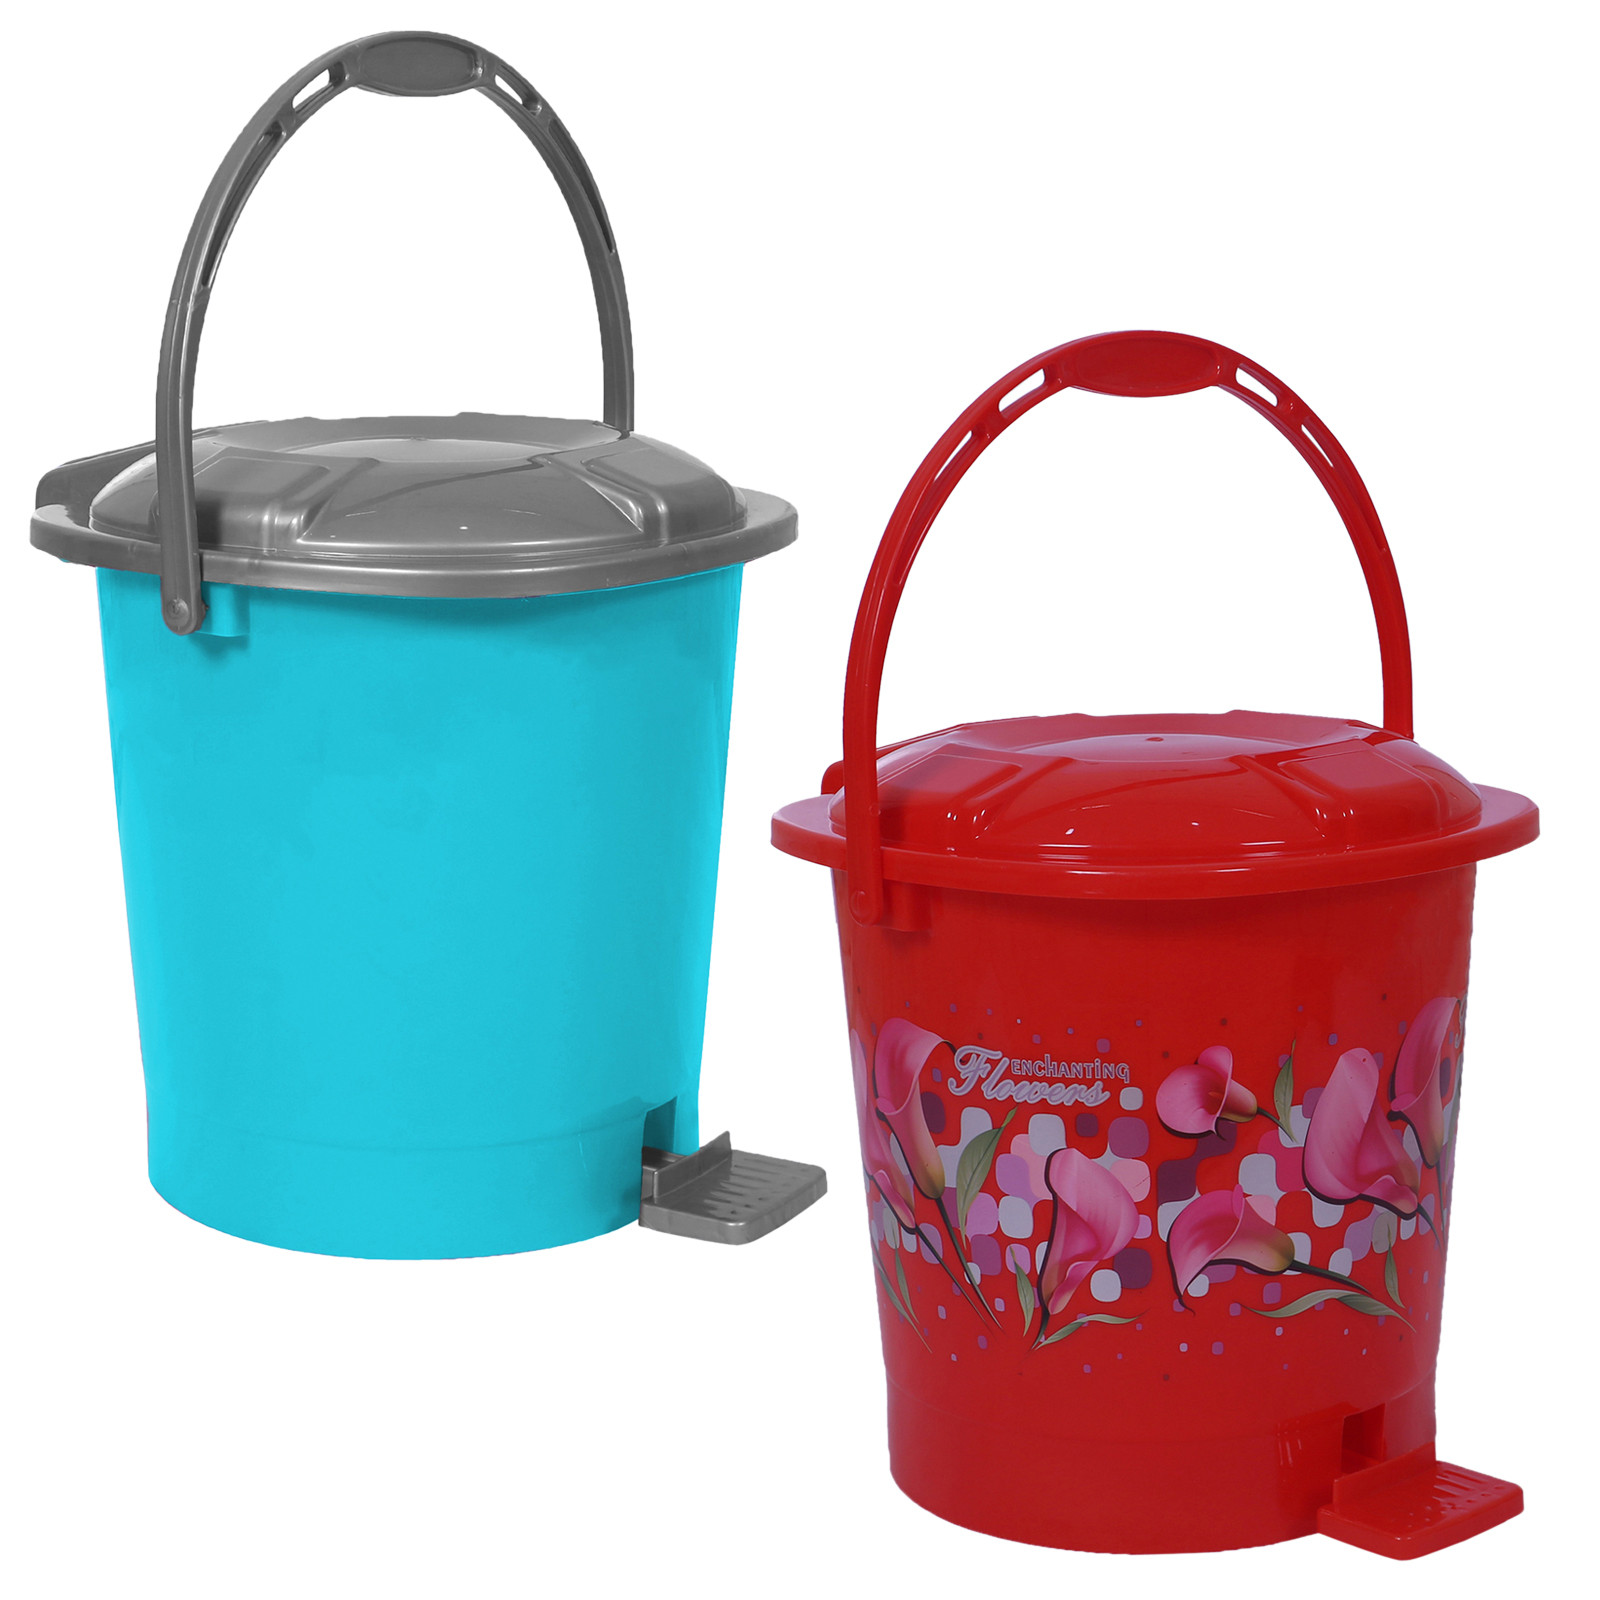 Kuber Industries Durable Plastic Pedal Dustbin|Waste Bin|Trash Can For Kitchen & Home With Handle,10 Litre,Pack of 2 (Sky Blue & Red)